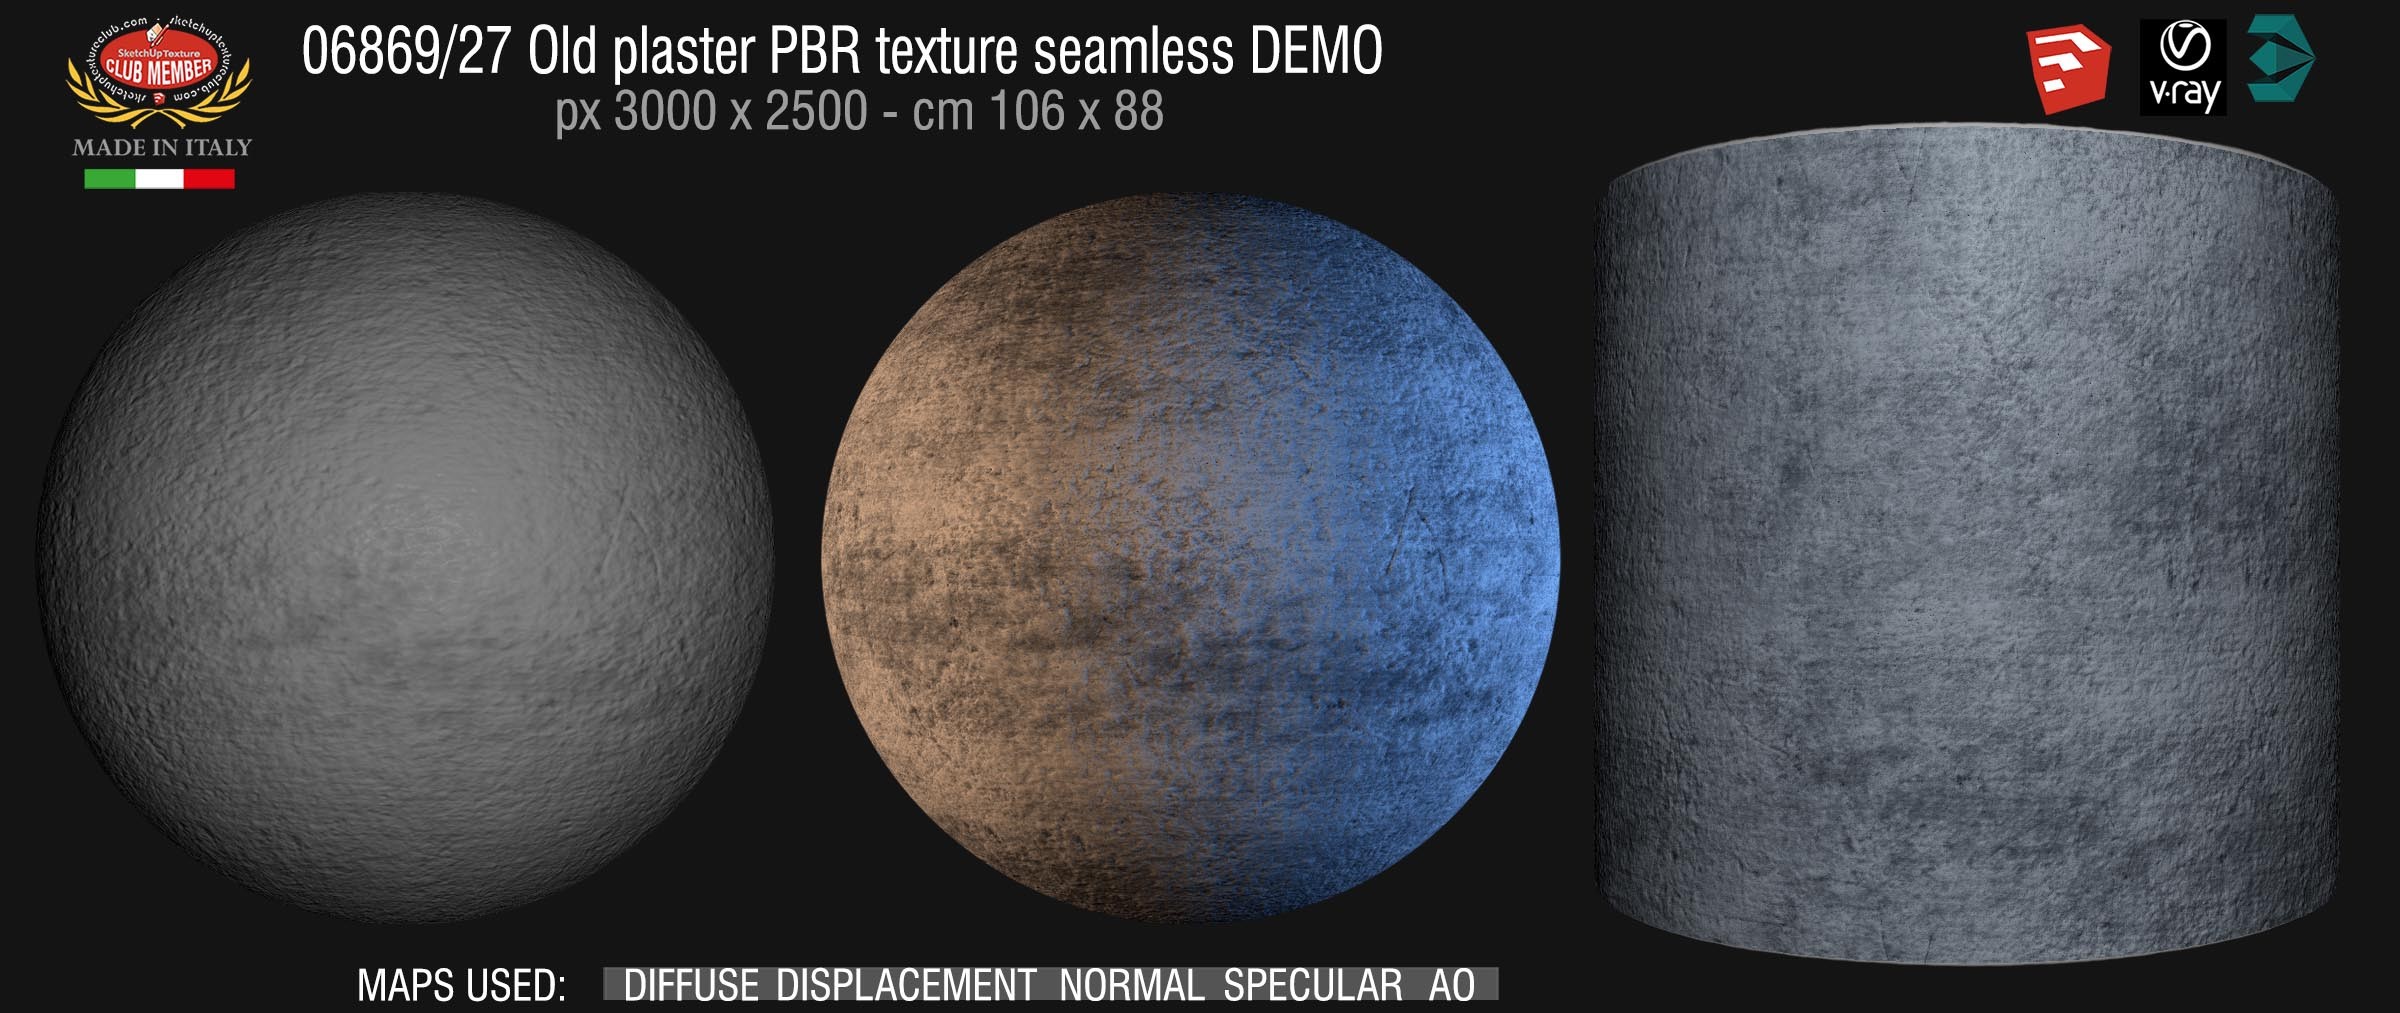 06869_27 Old plaster PBR texture seamless DEMO